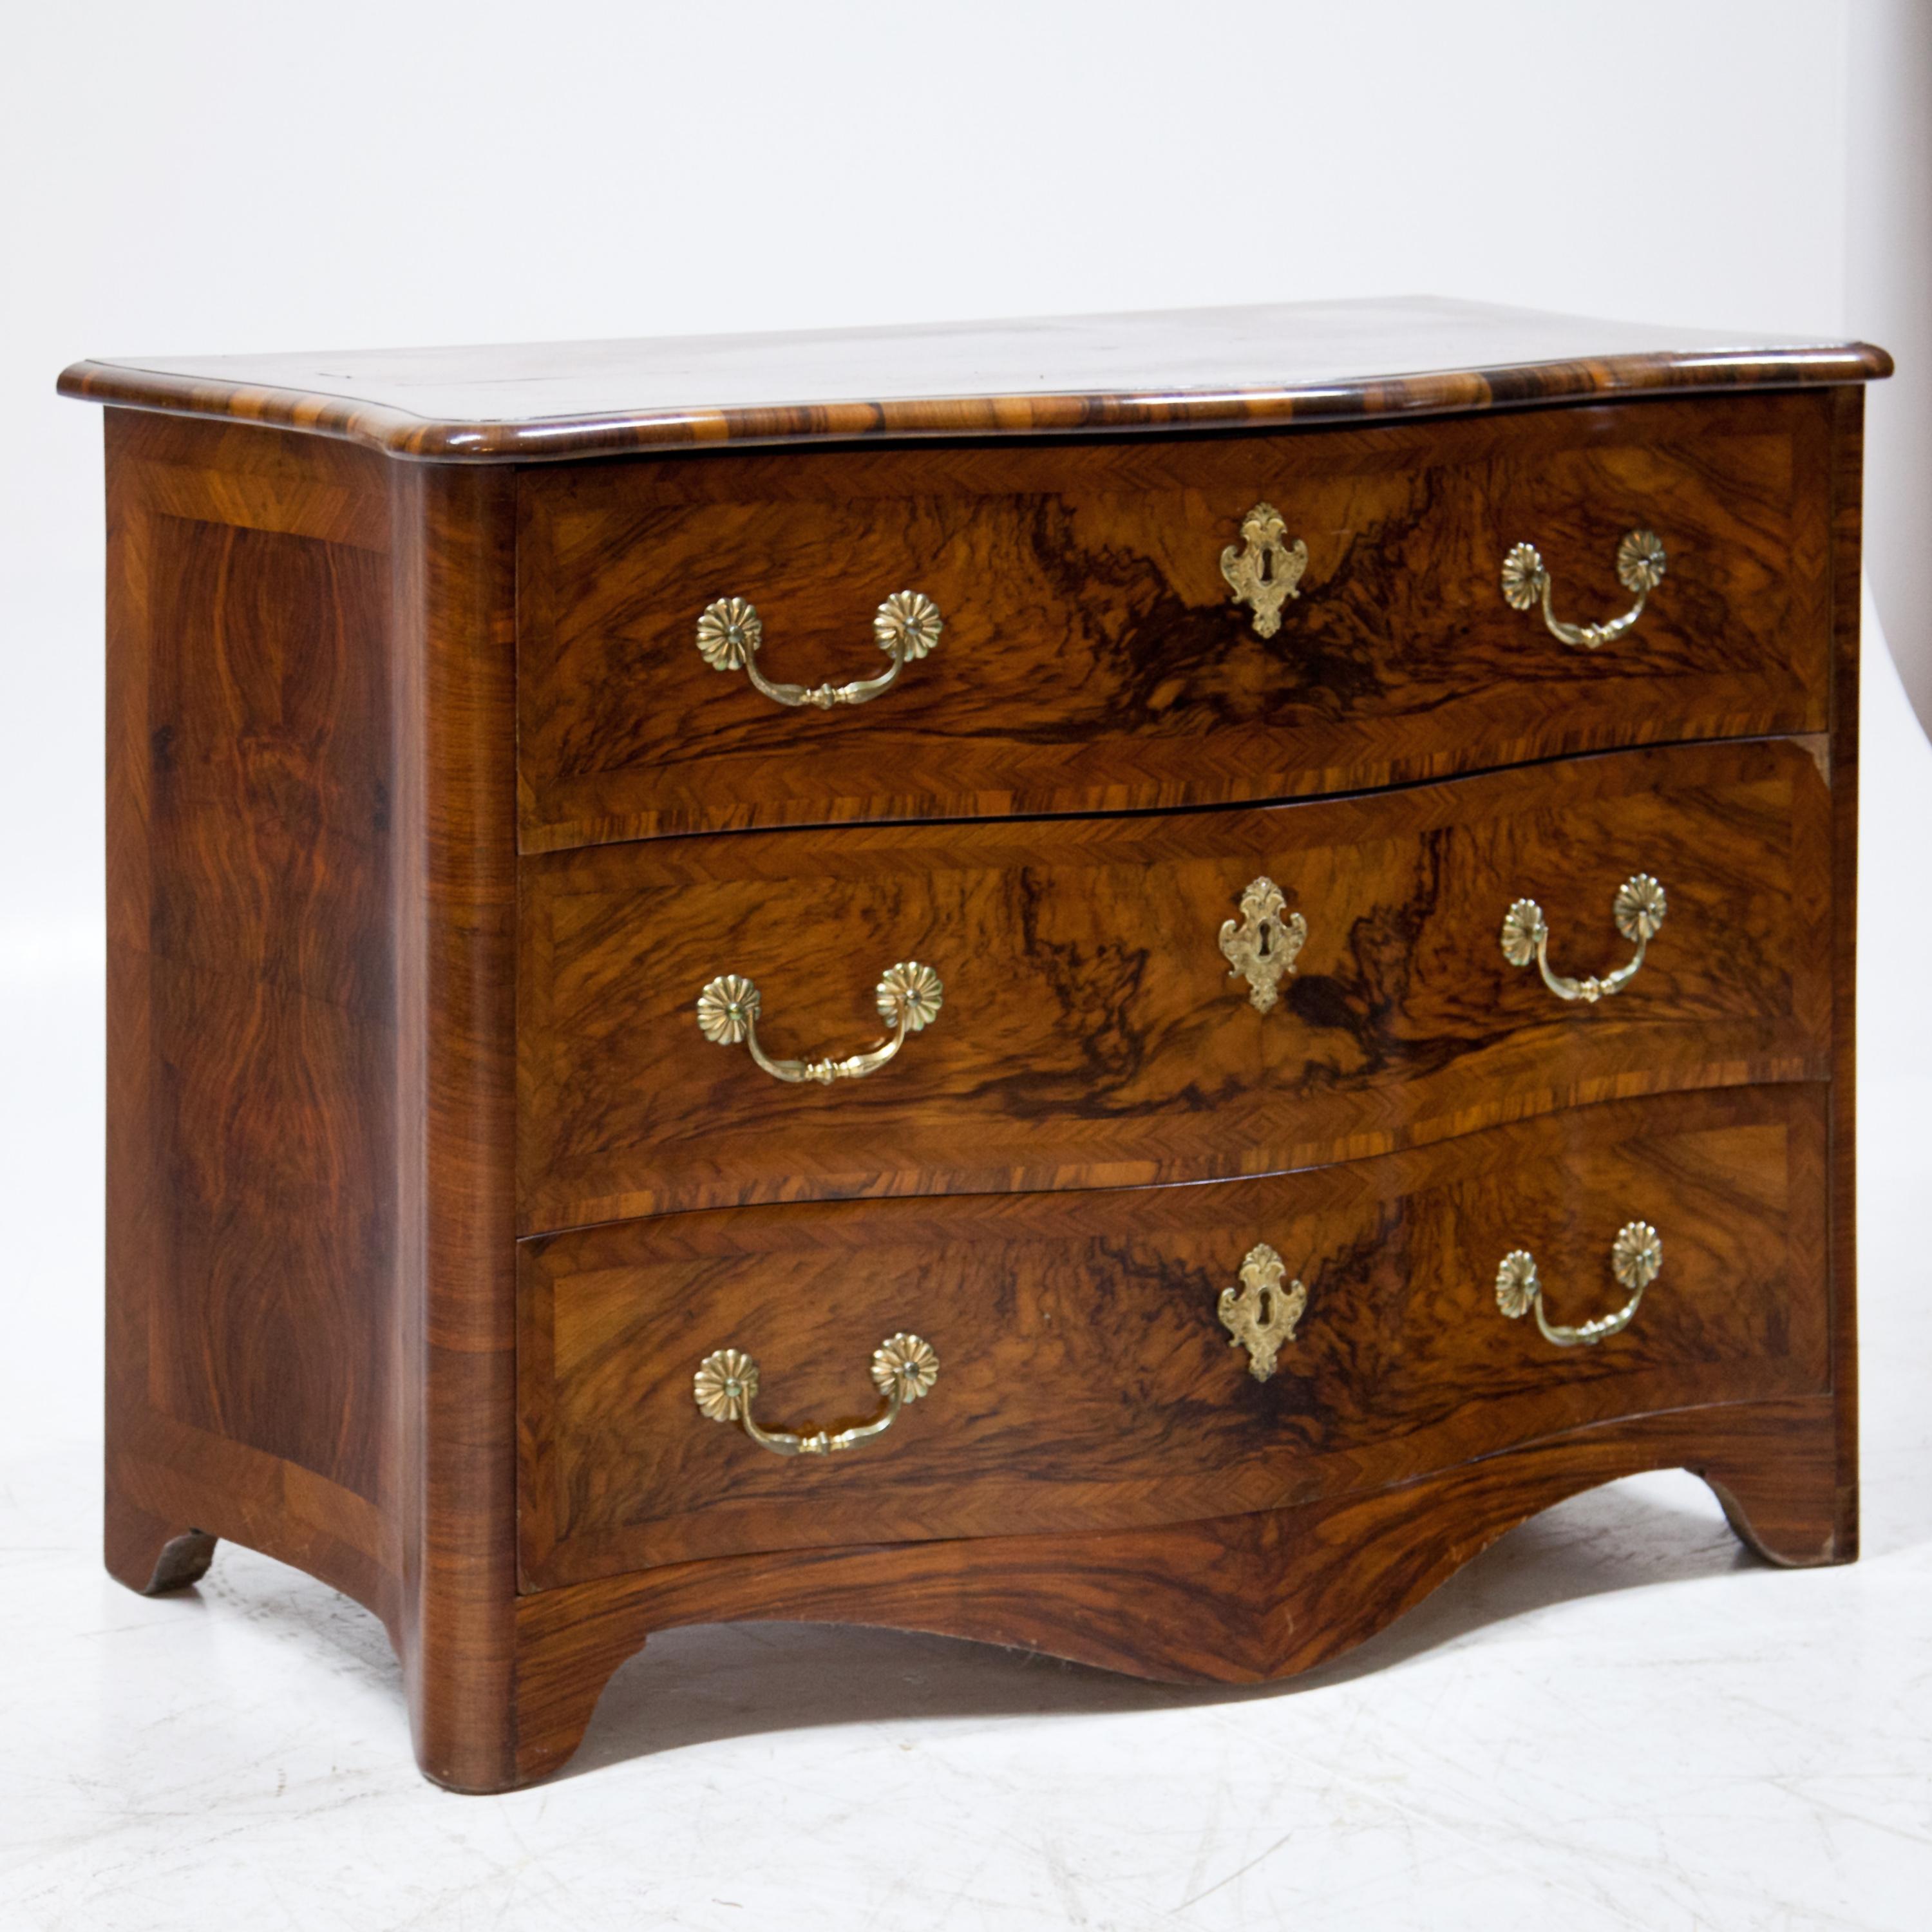 Three-door baroque chest of drawers on curved frame feet with bulbous front and concave sides. Very beautiful walnut veneer. Expertly restored condition.